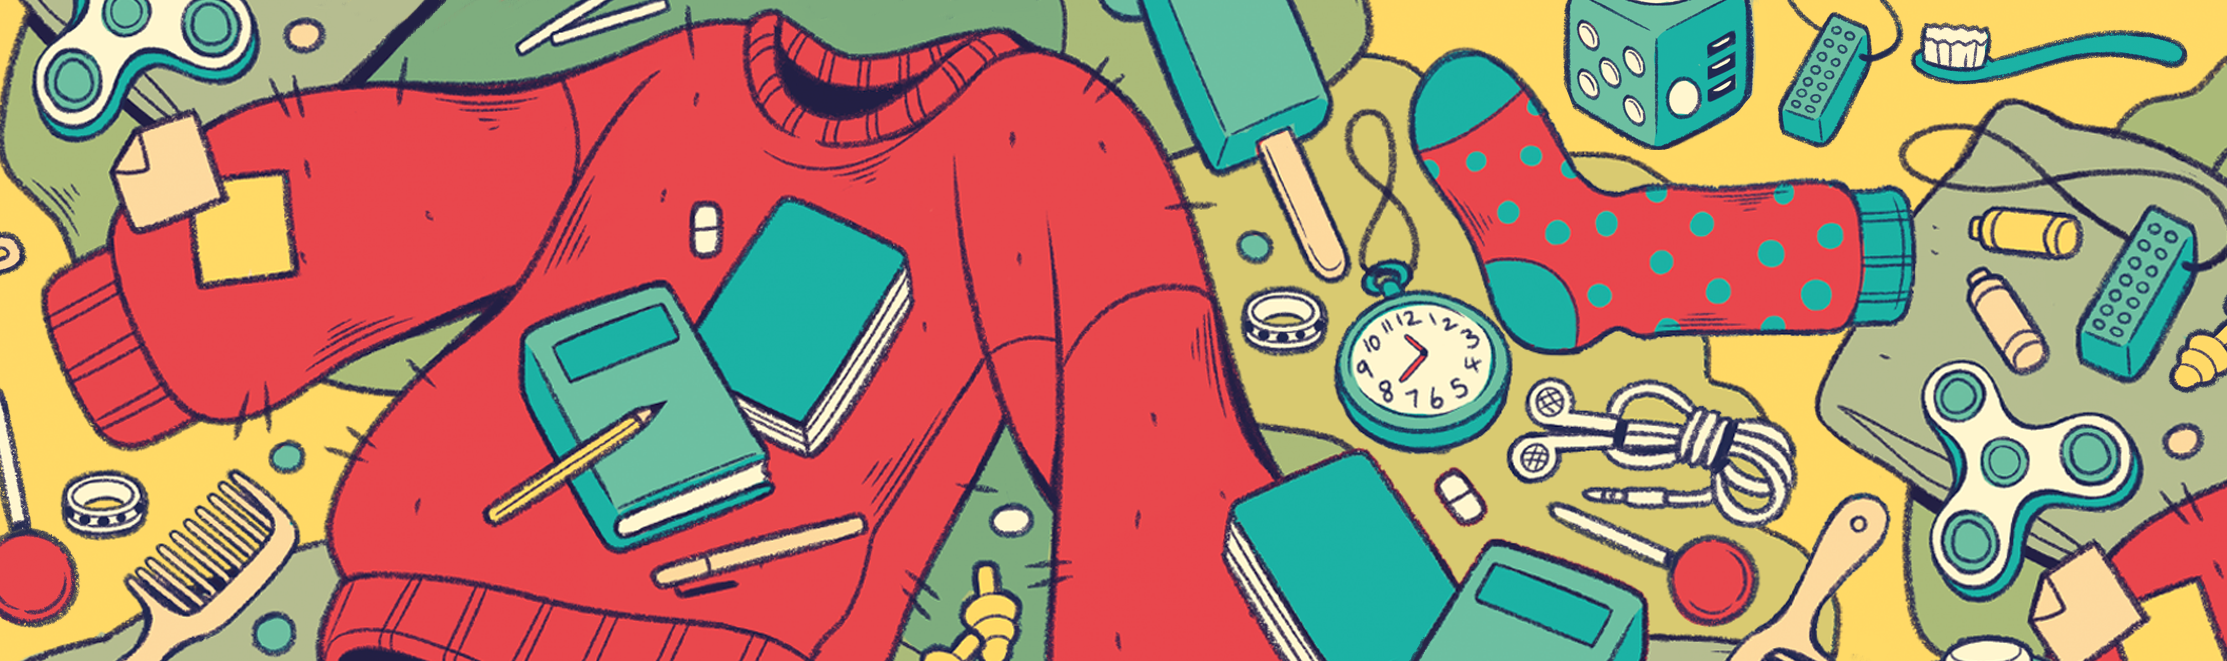 Banner for SENSORY: Life on the Spectrum featuring an illustration of clutter on the floor. The clutter features a large red jumper and a bunch of sensory items, including a fidget ring, chewable necklace, fidget spinner, fidget cube, earplugs and other miscellaneous items including an ice lolly, a comb, books, earphones, a pocket watch and stationary.